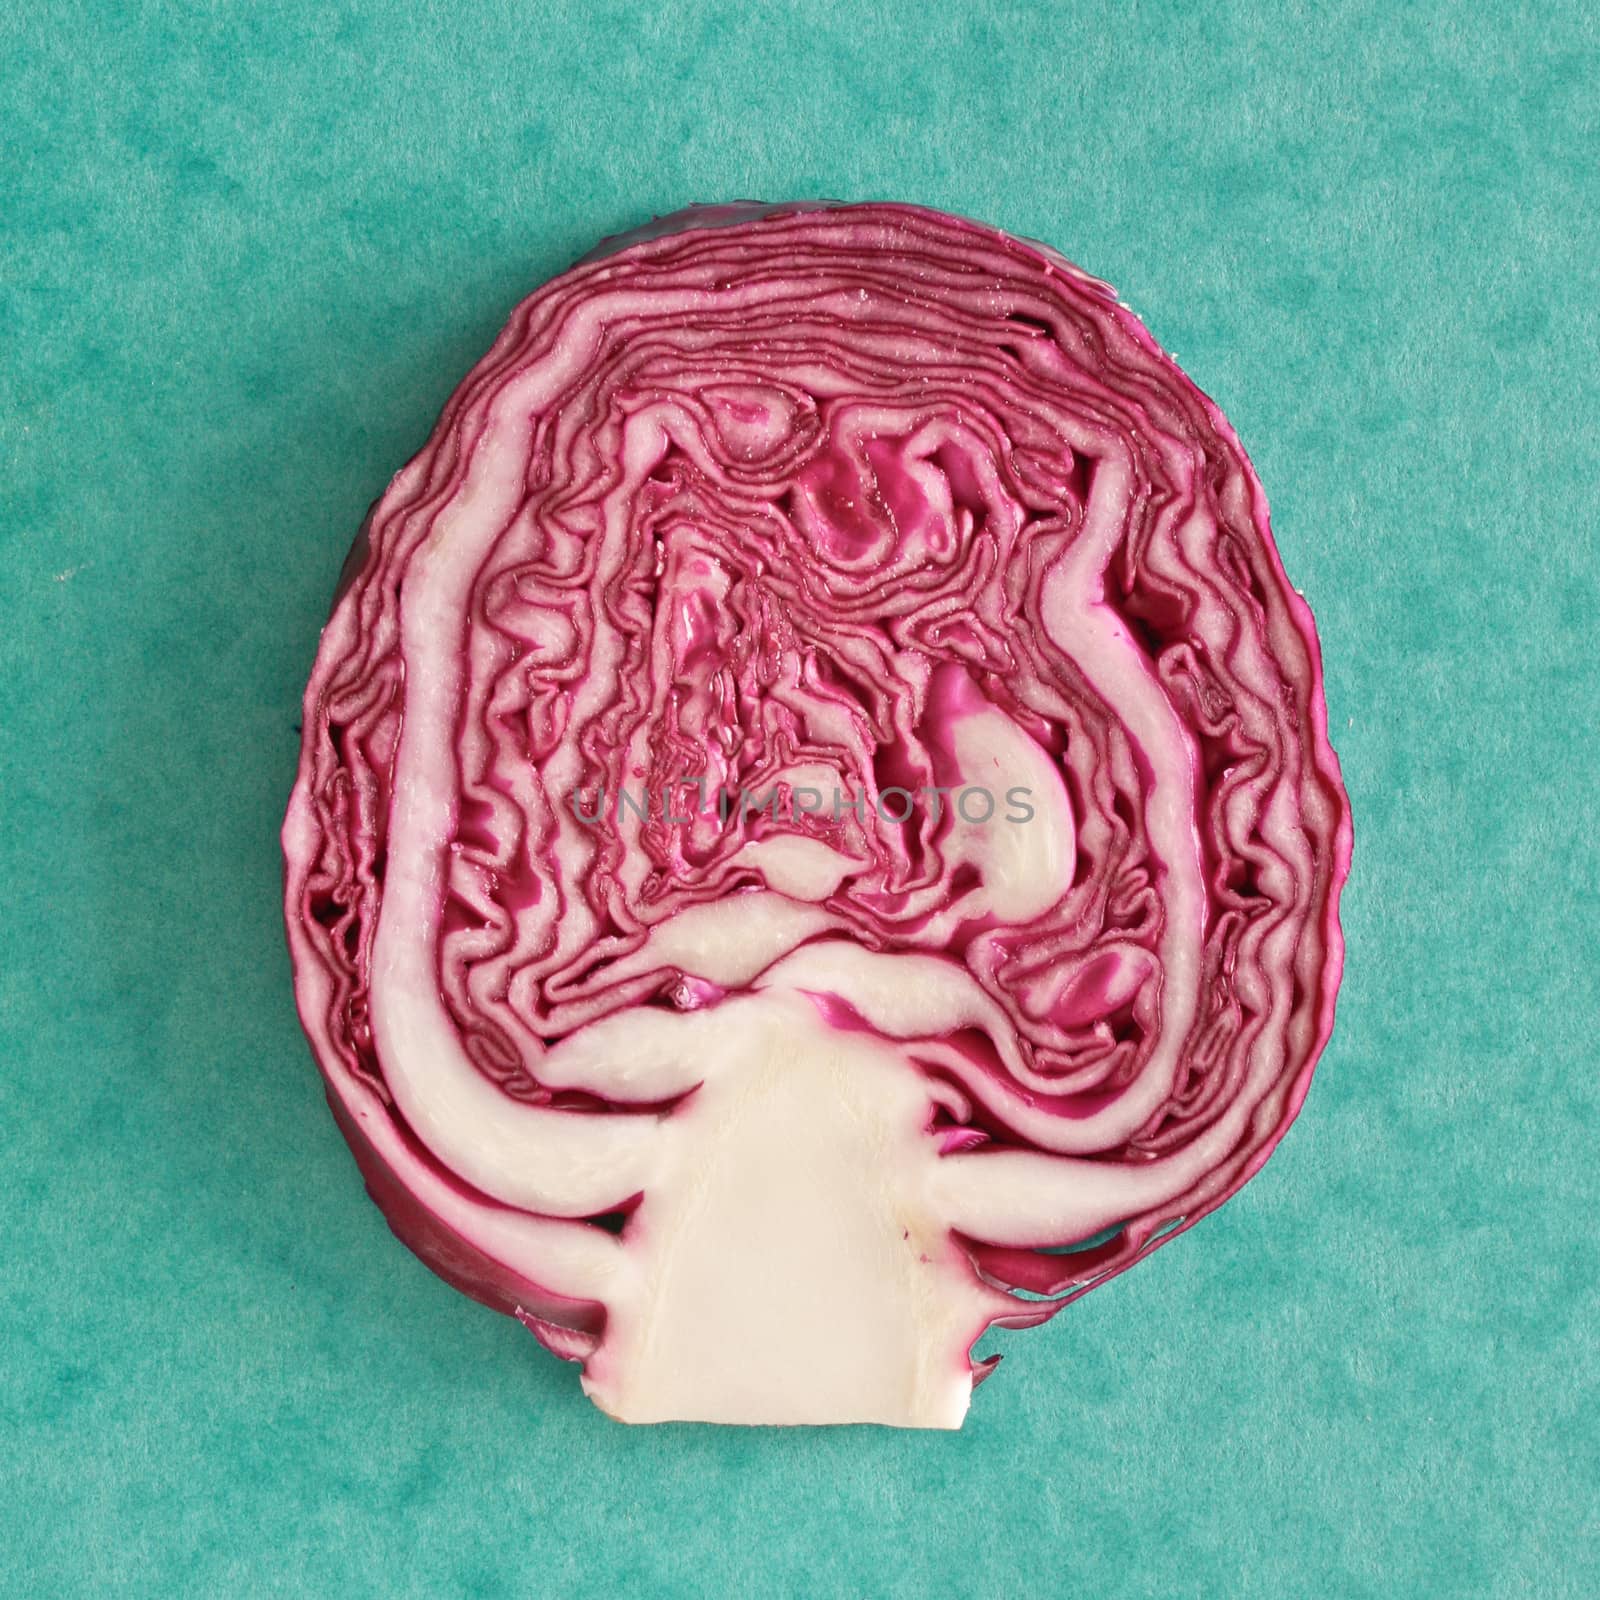 Red cabbage by trgowanlock